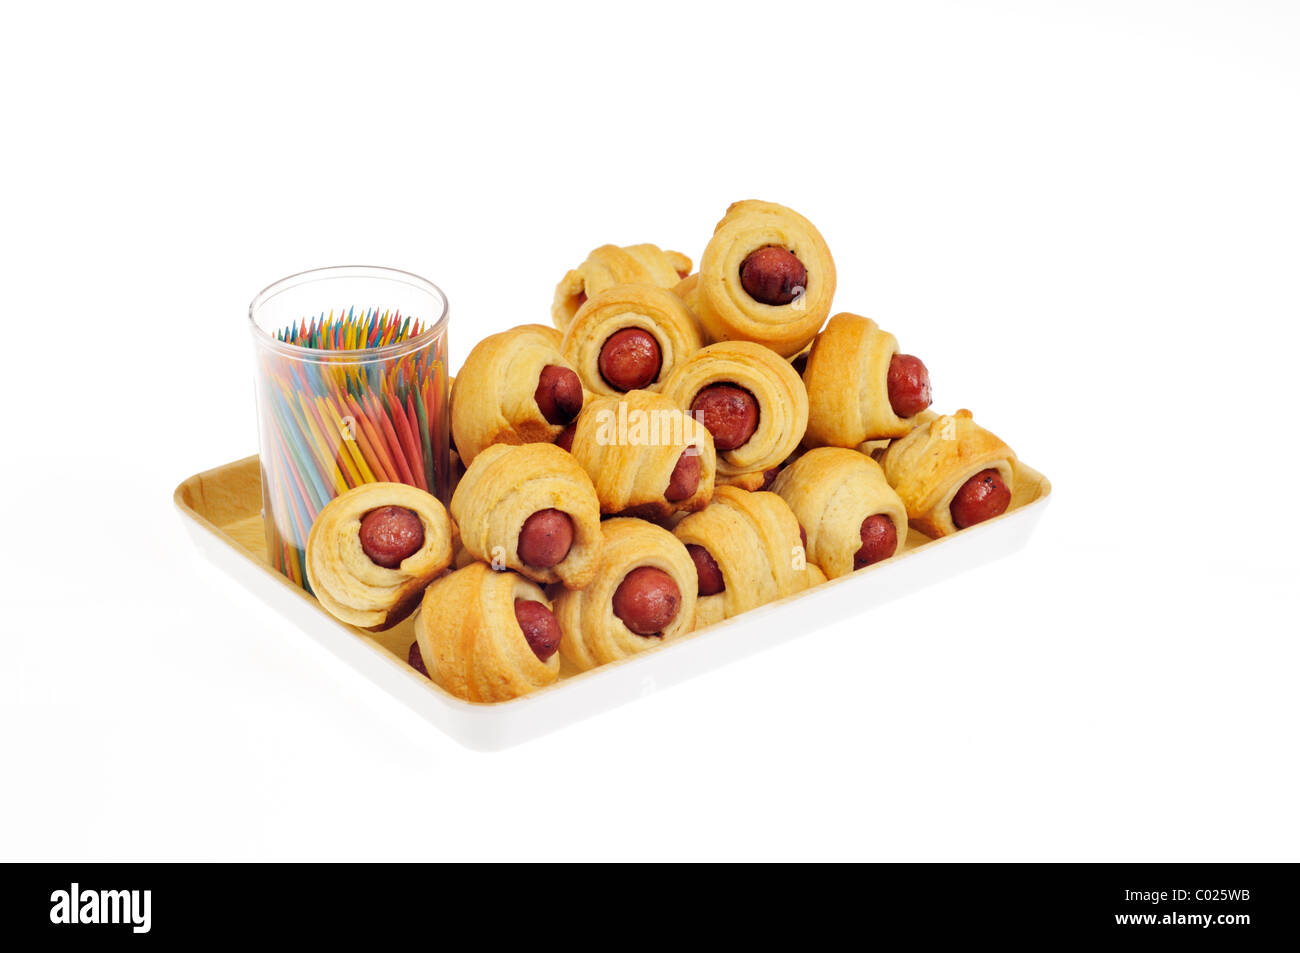 Pigs in a Blanket with toothpicks on serving tray on white background cutout Stock Photo